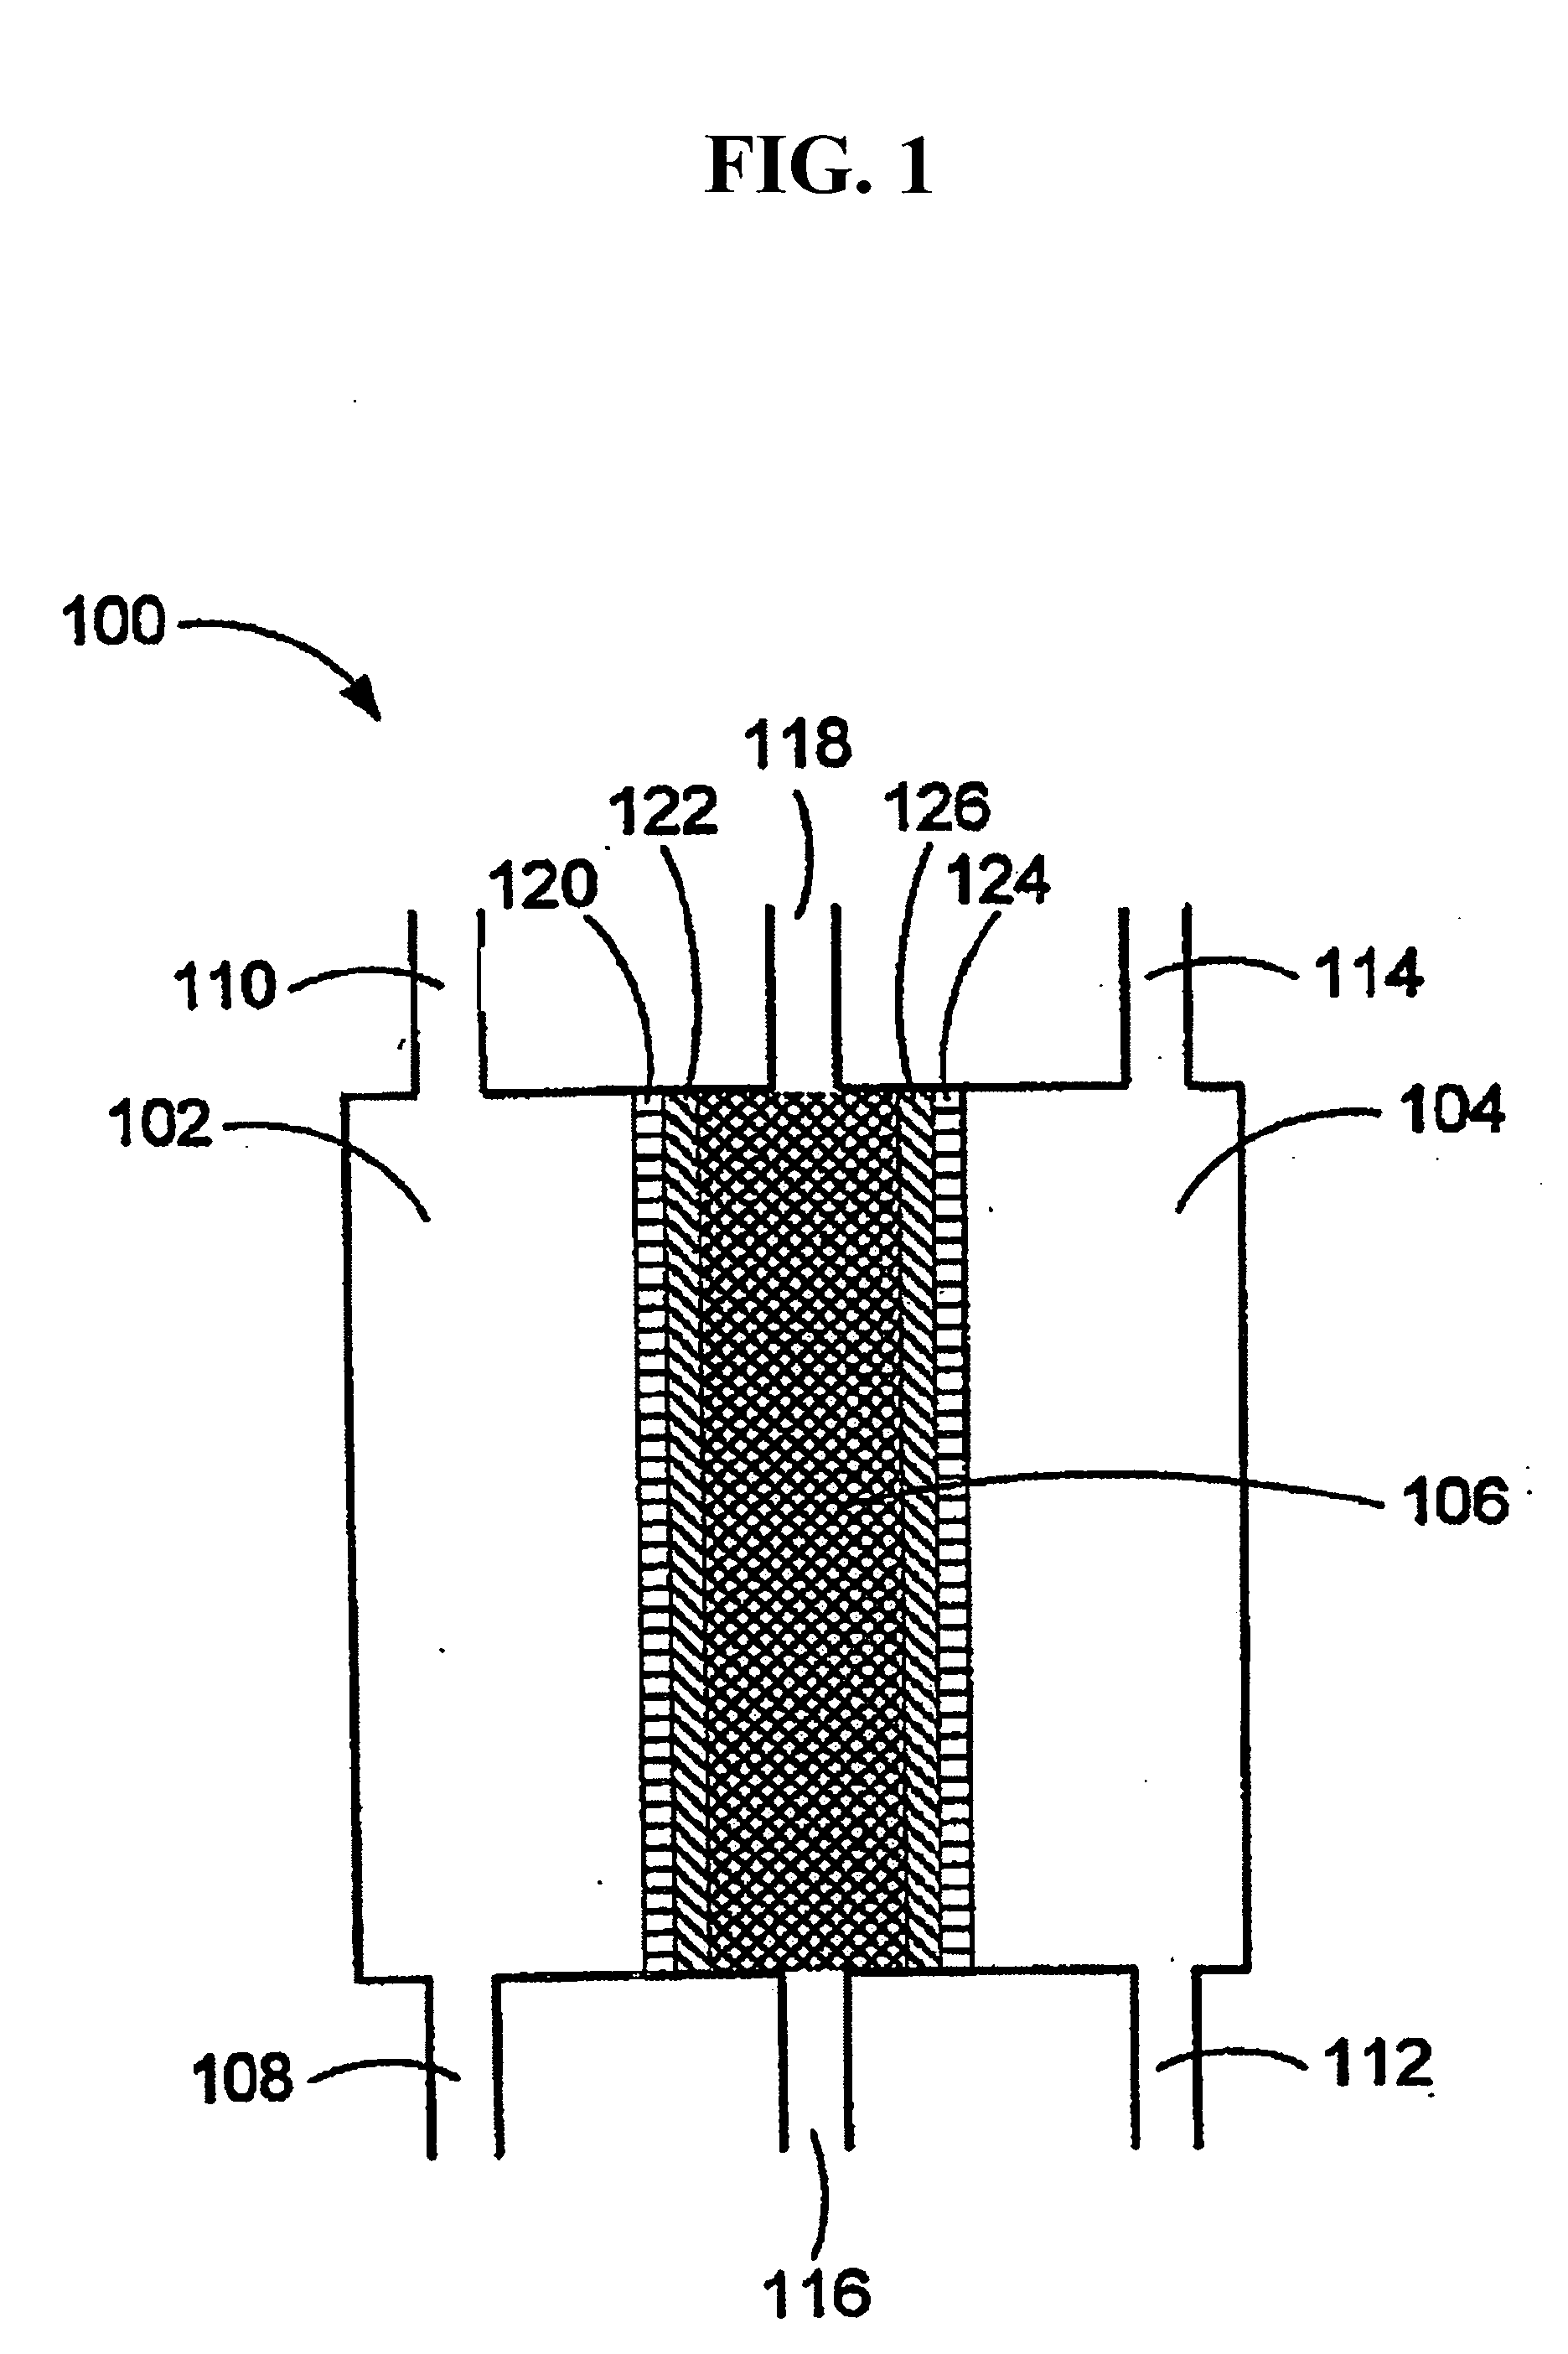 Methods of treating or preventing inflammation and hypersensitivity with oxidative reductive potential water solution